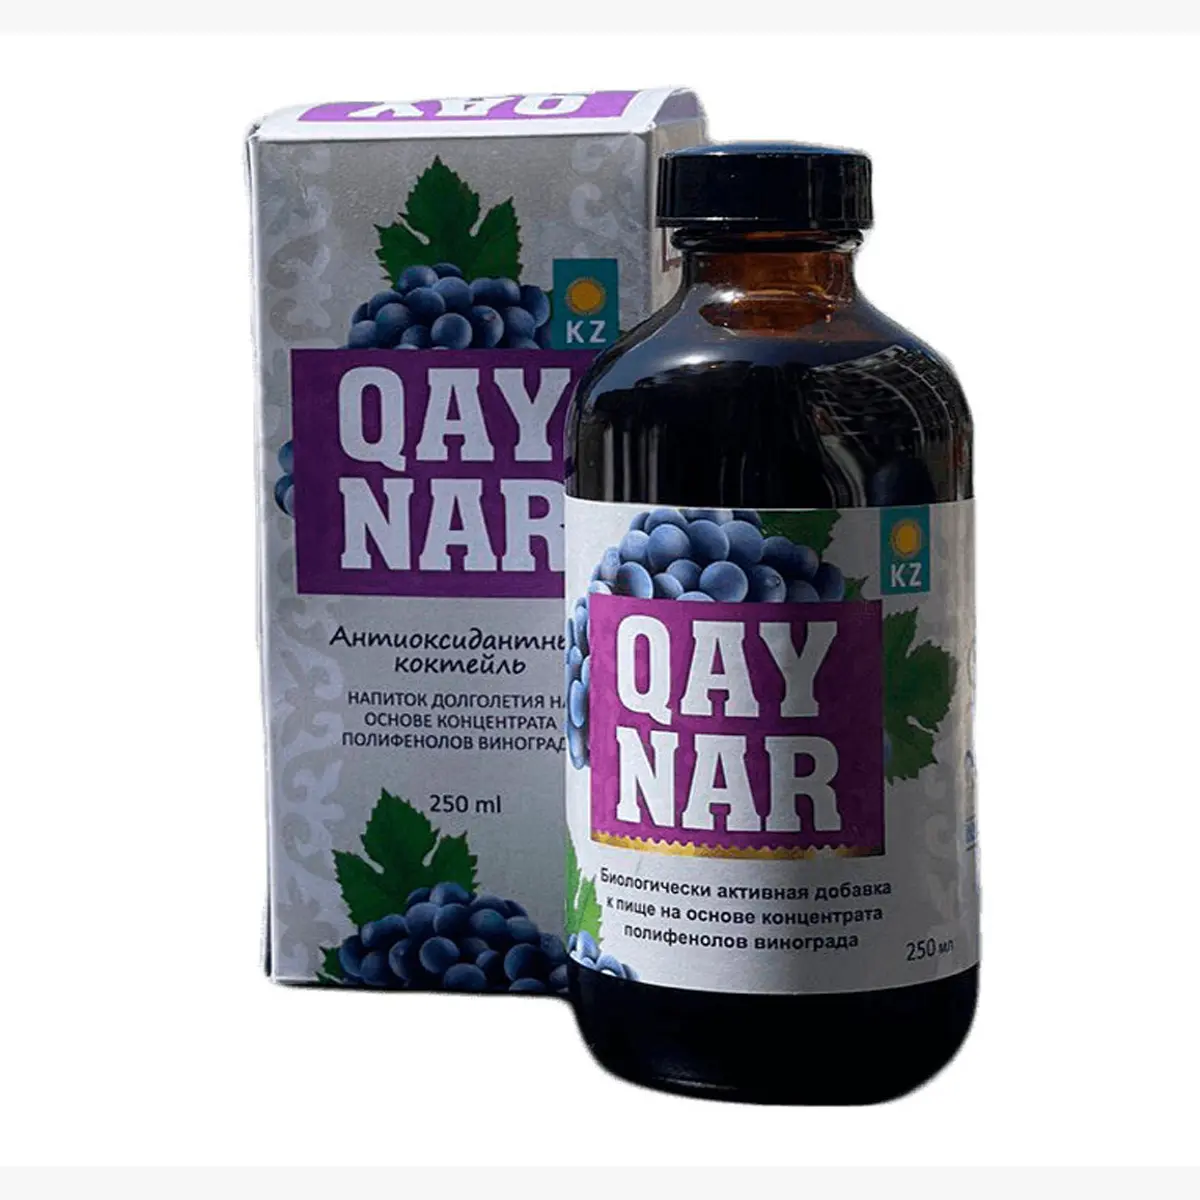 Polyphenol extract of grape seeds "QAYNAR" bio-active food supplement contains natural antioxidants, top quality product